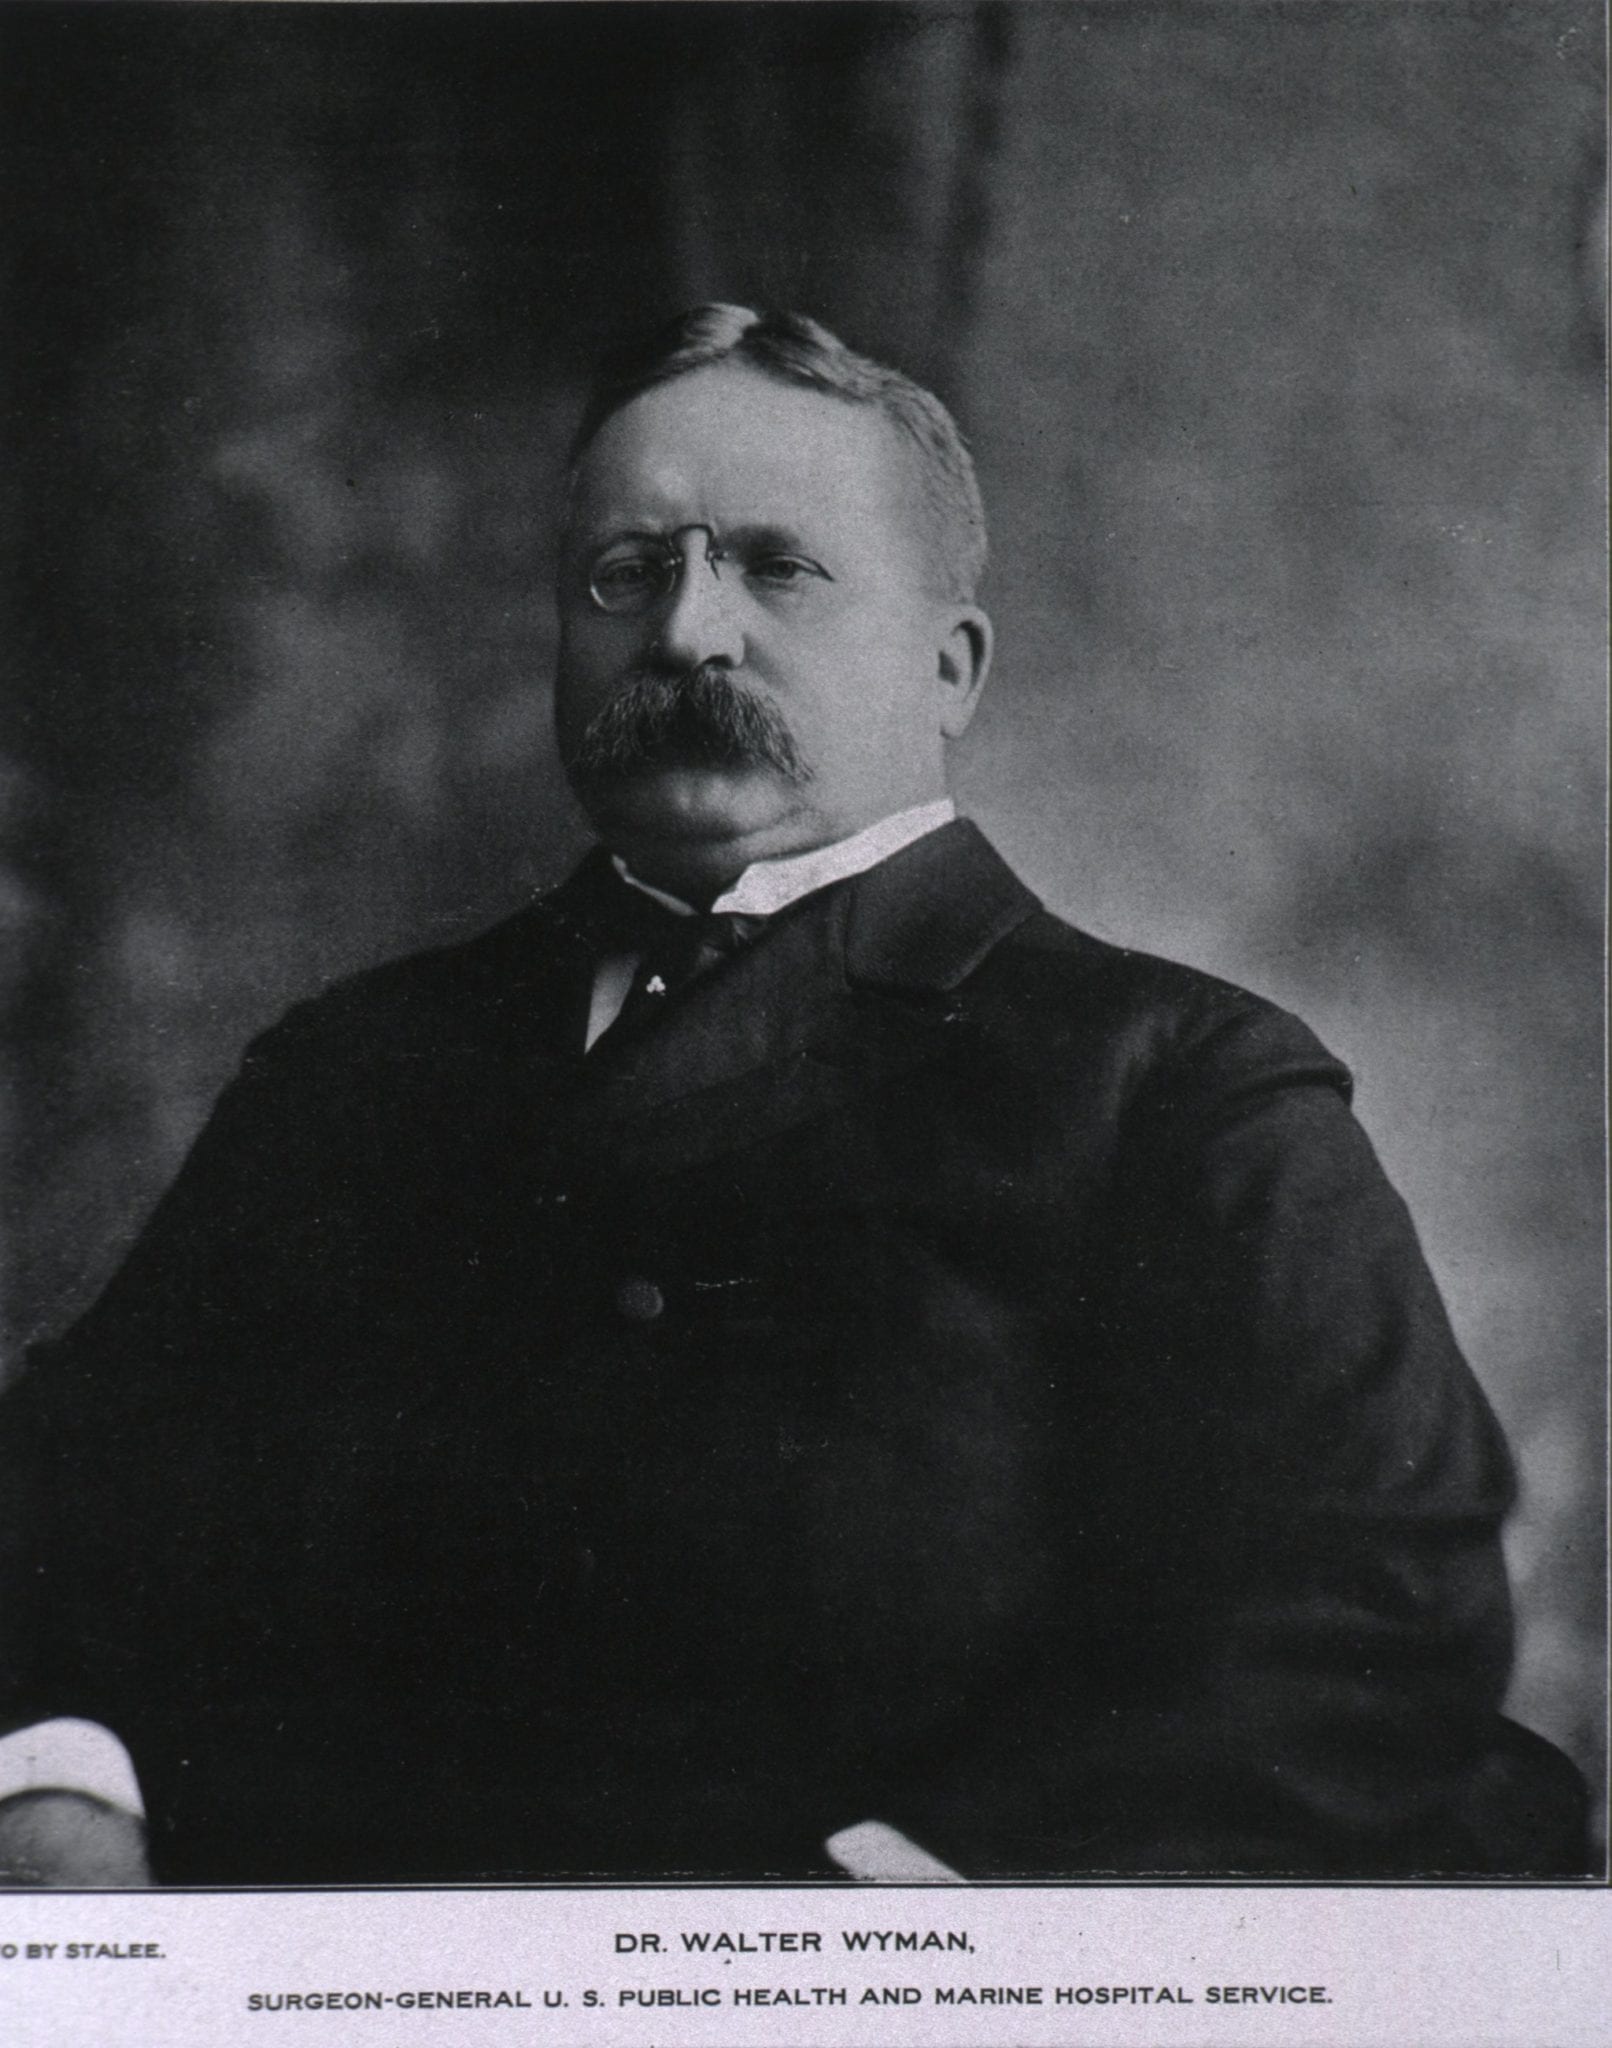 Surgeon General William Wyman, a man with glasses and a mustache, who resembles Theodore Roosevelt and who ordered investigations into the cause of yellow fever